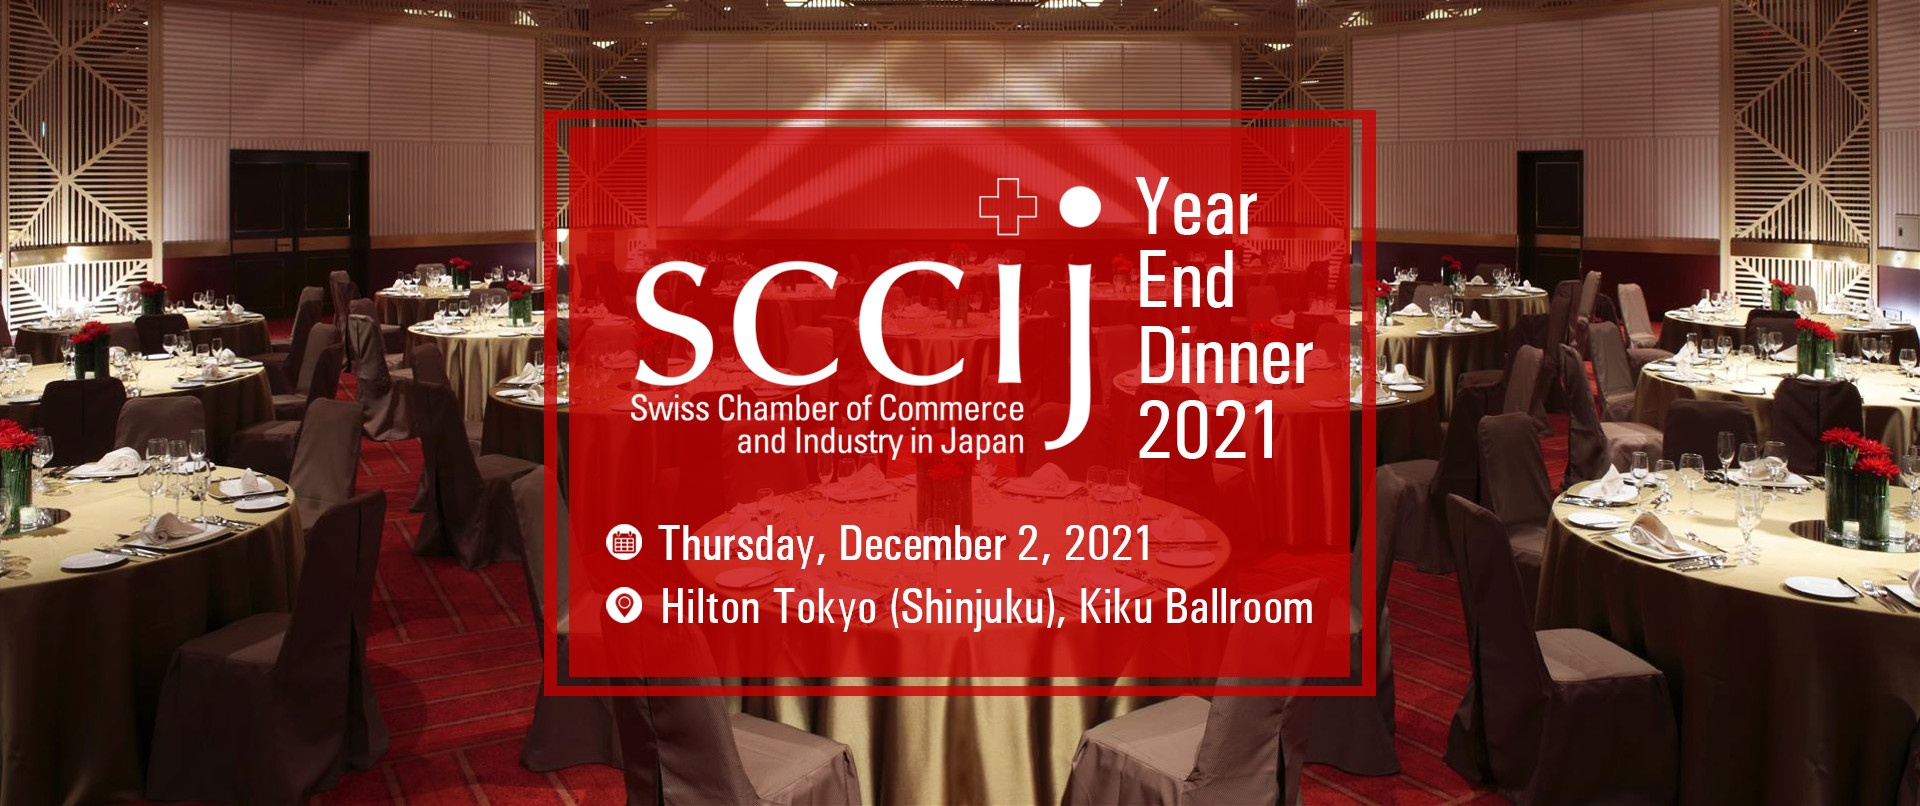 SCCIJ Year End Dinner 2021